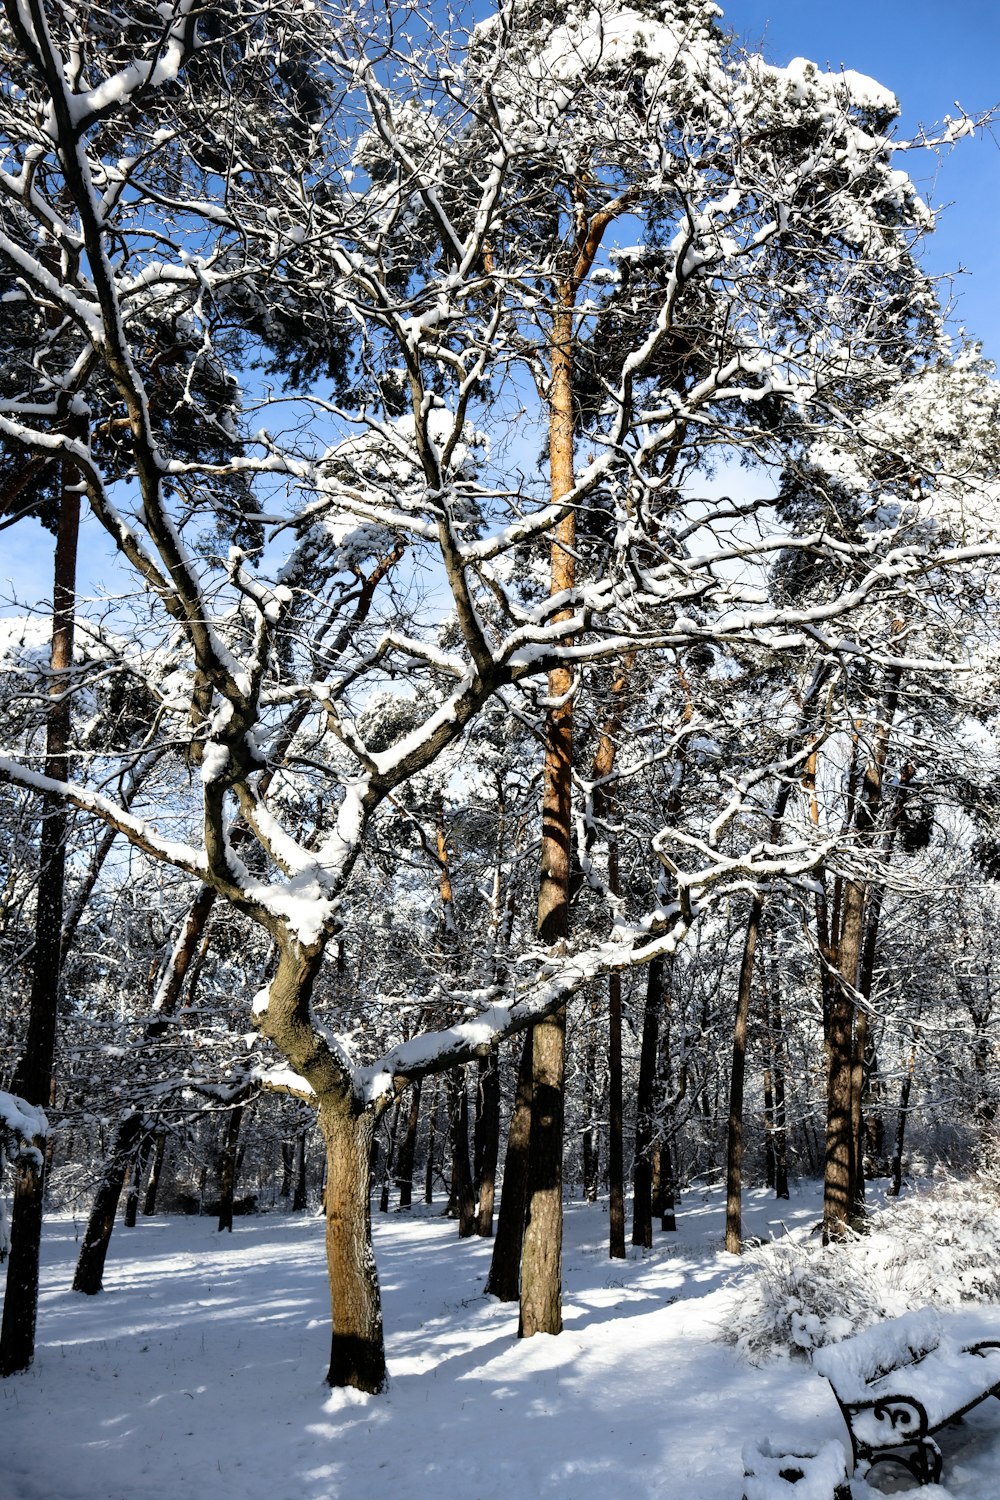 a snow covered forest with a bench in the foreground